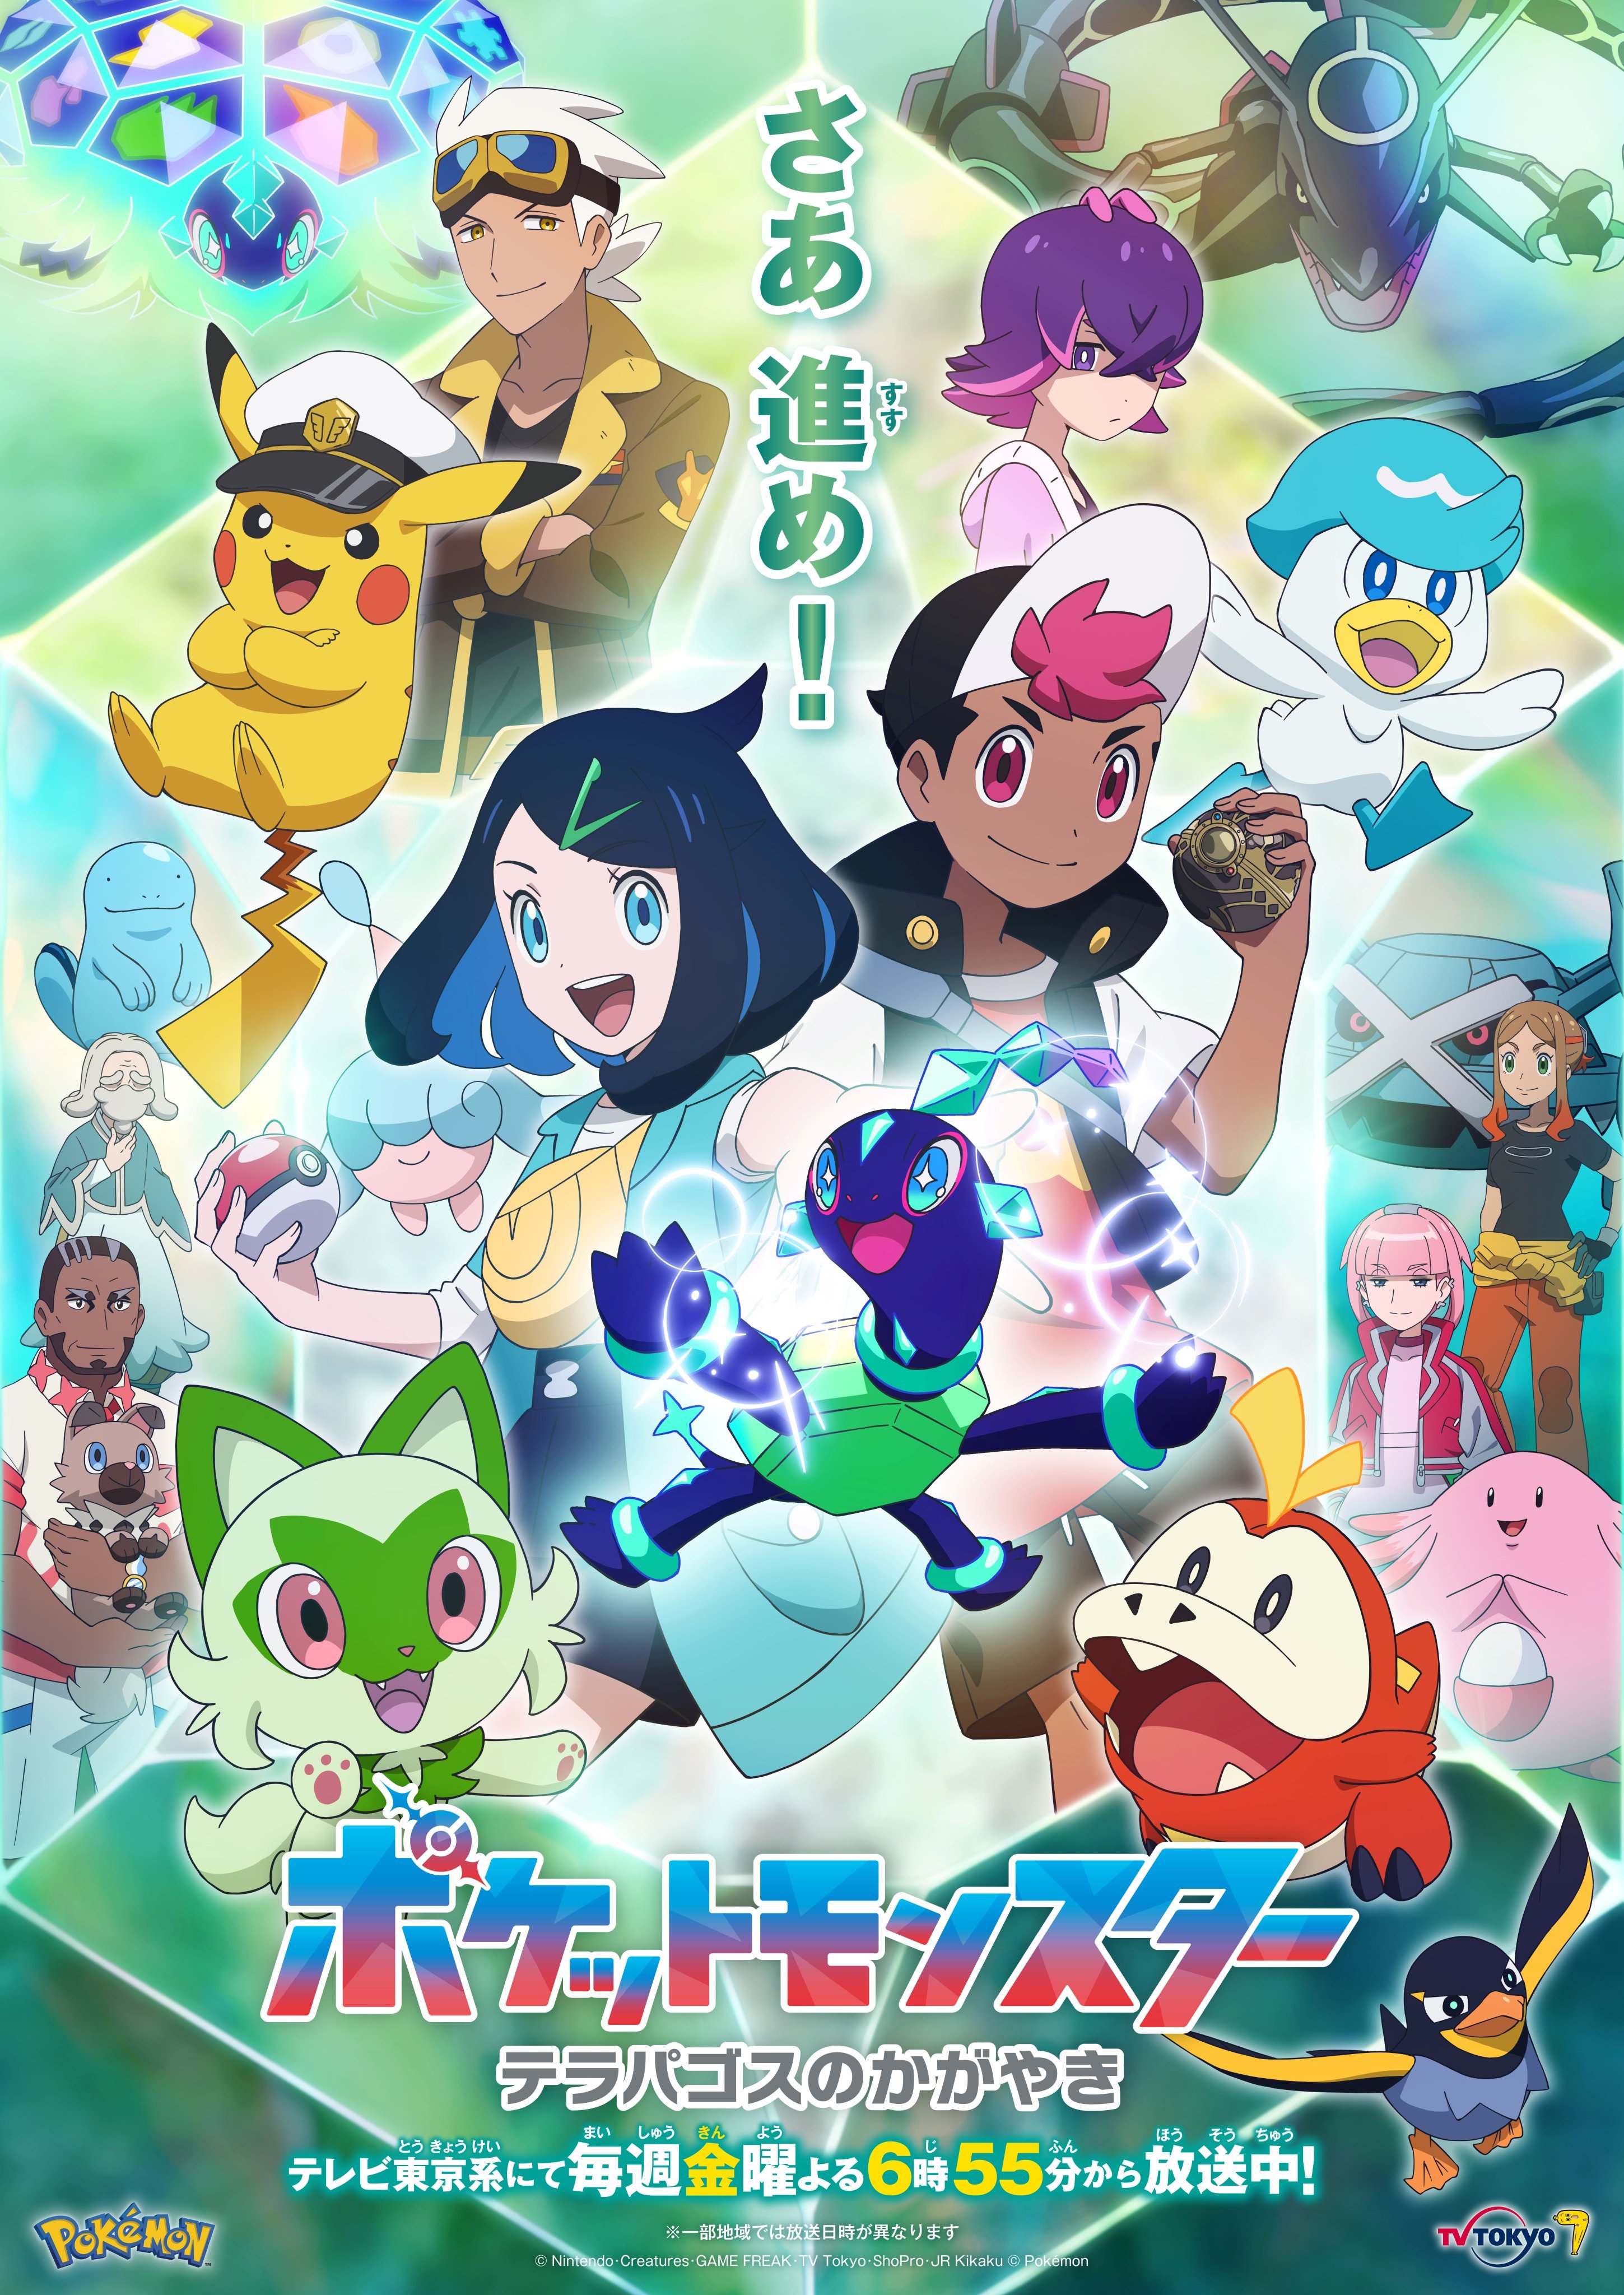 Serebii.net - A new poster has been released for the upcoming arc of the  Pokémon Sun & Moon anime featuring the Ultra Beasts. What are your thoughts  on this upcoming arc?